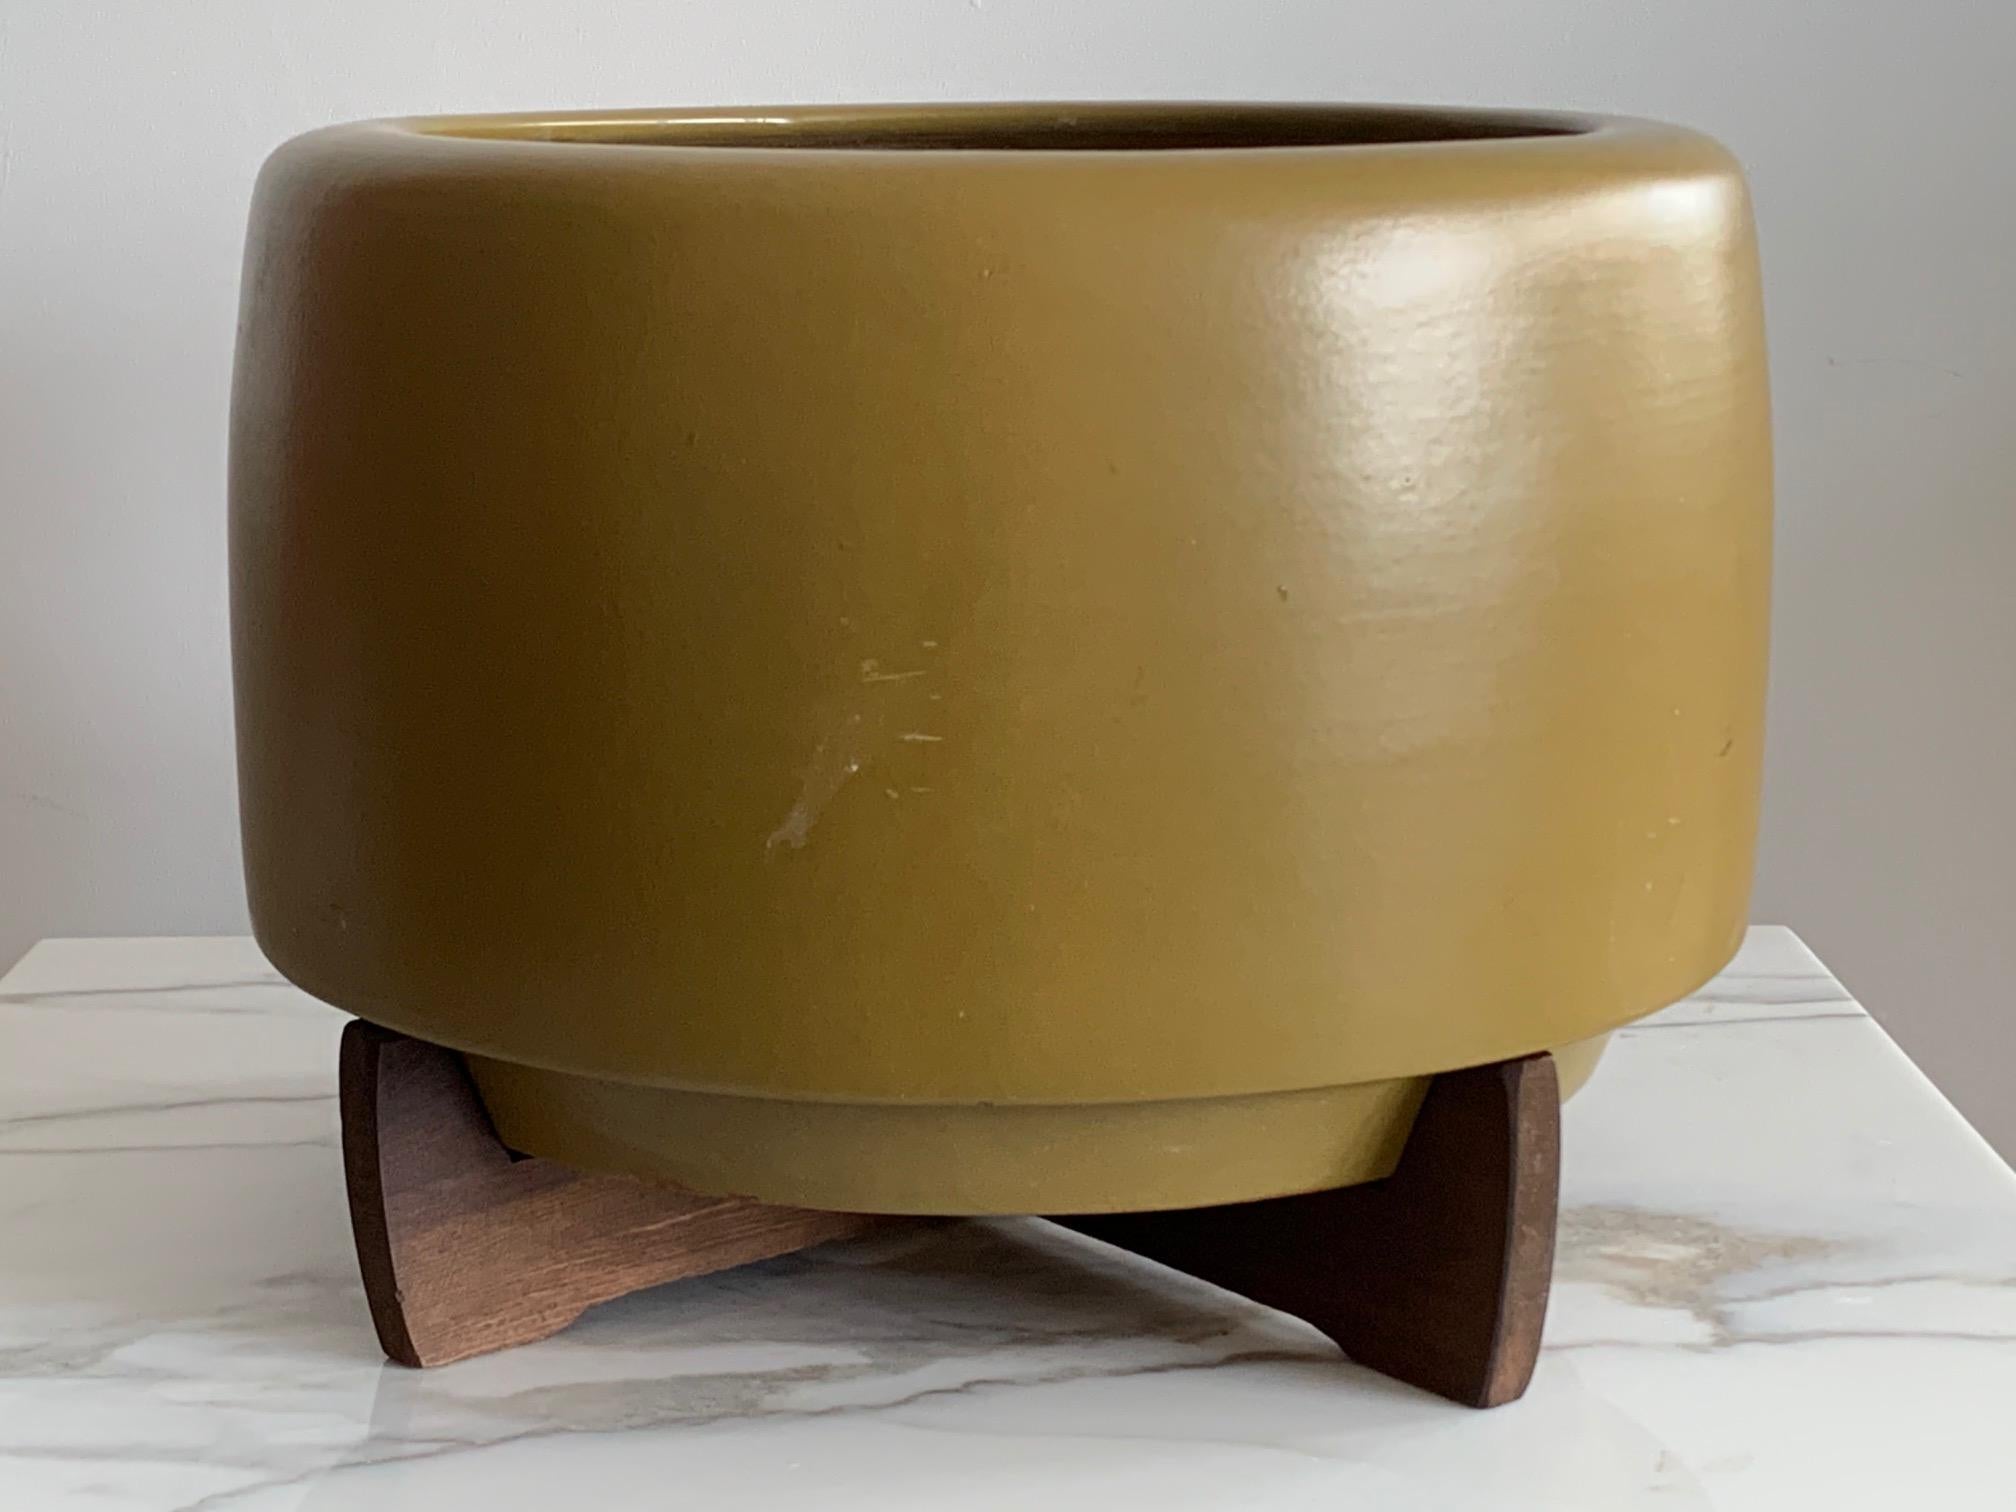 An unusual and hard to find John Follis and Rex Goode planter by Architectural Pottery circa 1970s. This is a yellow-ochre colored glaze with original redwood base. Very good original condition. Measures approximate 17.5